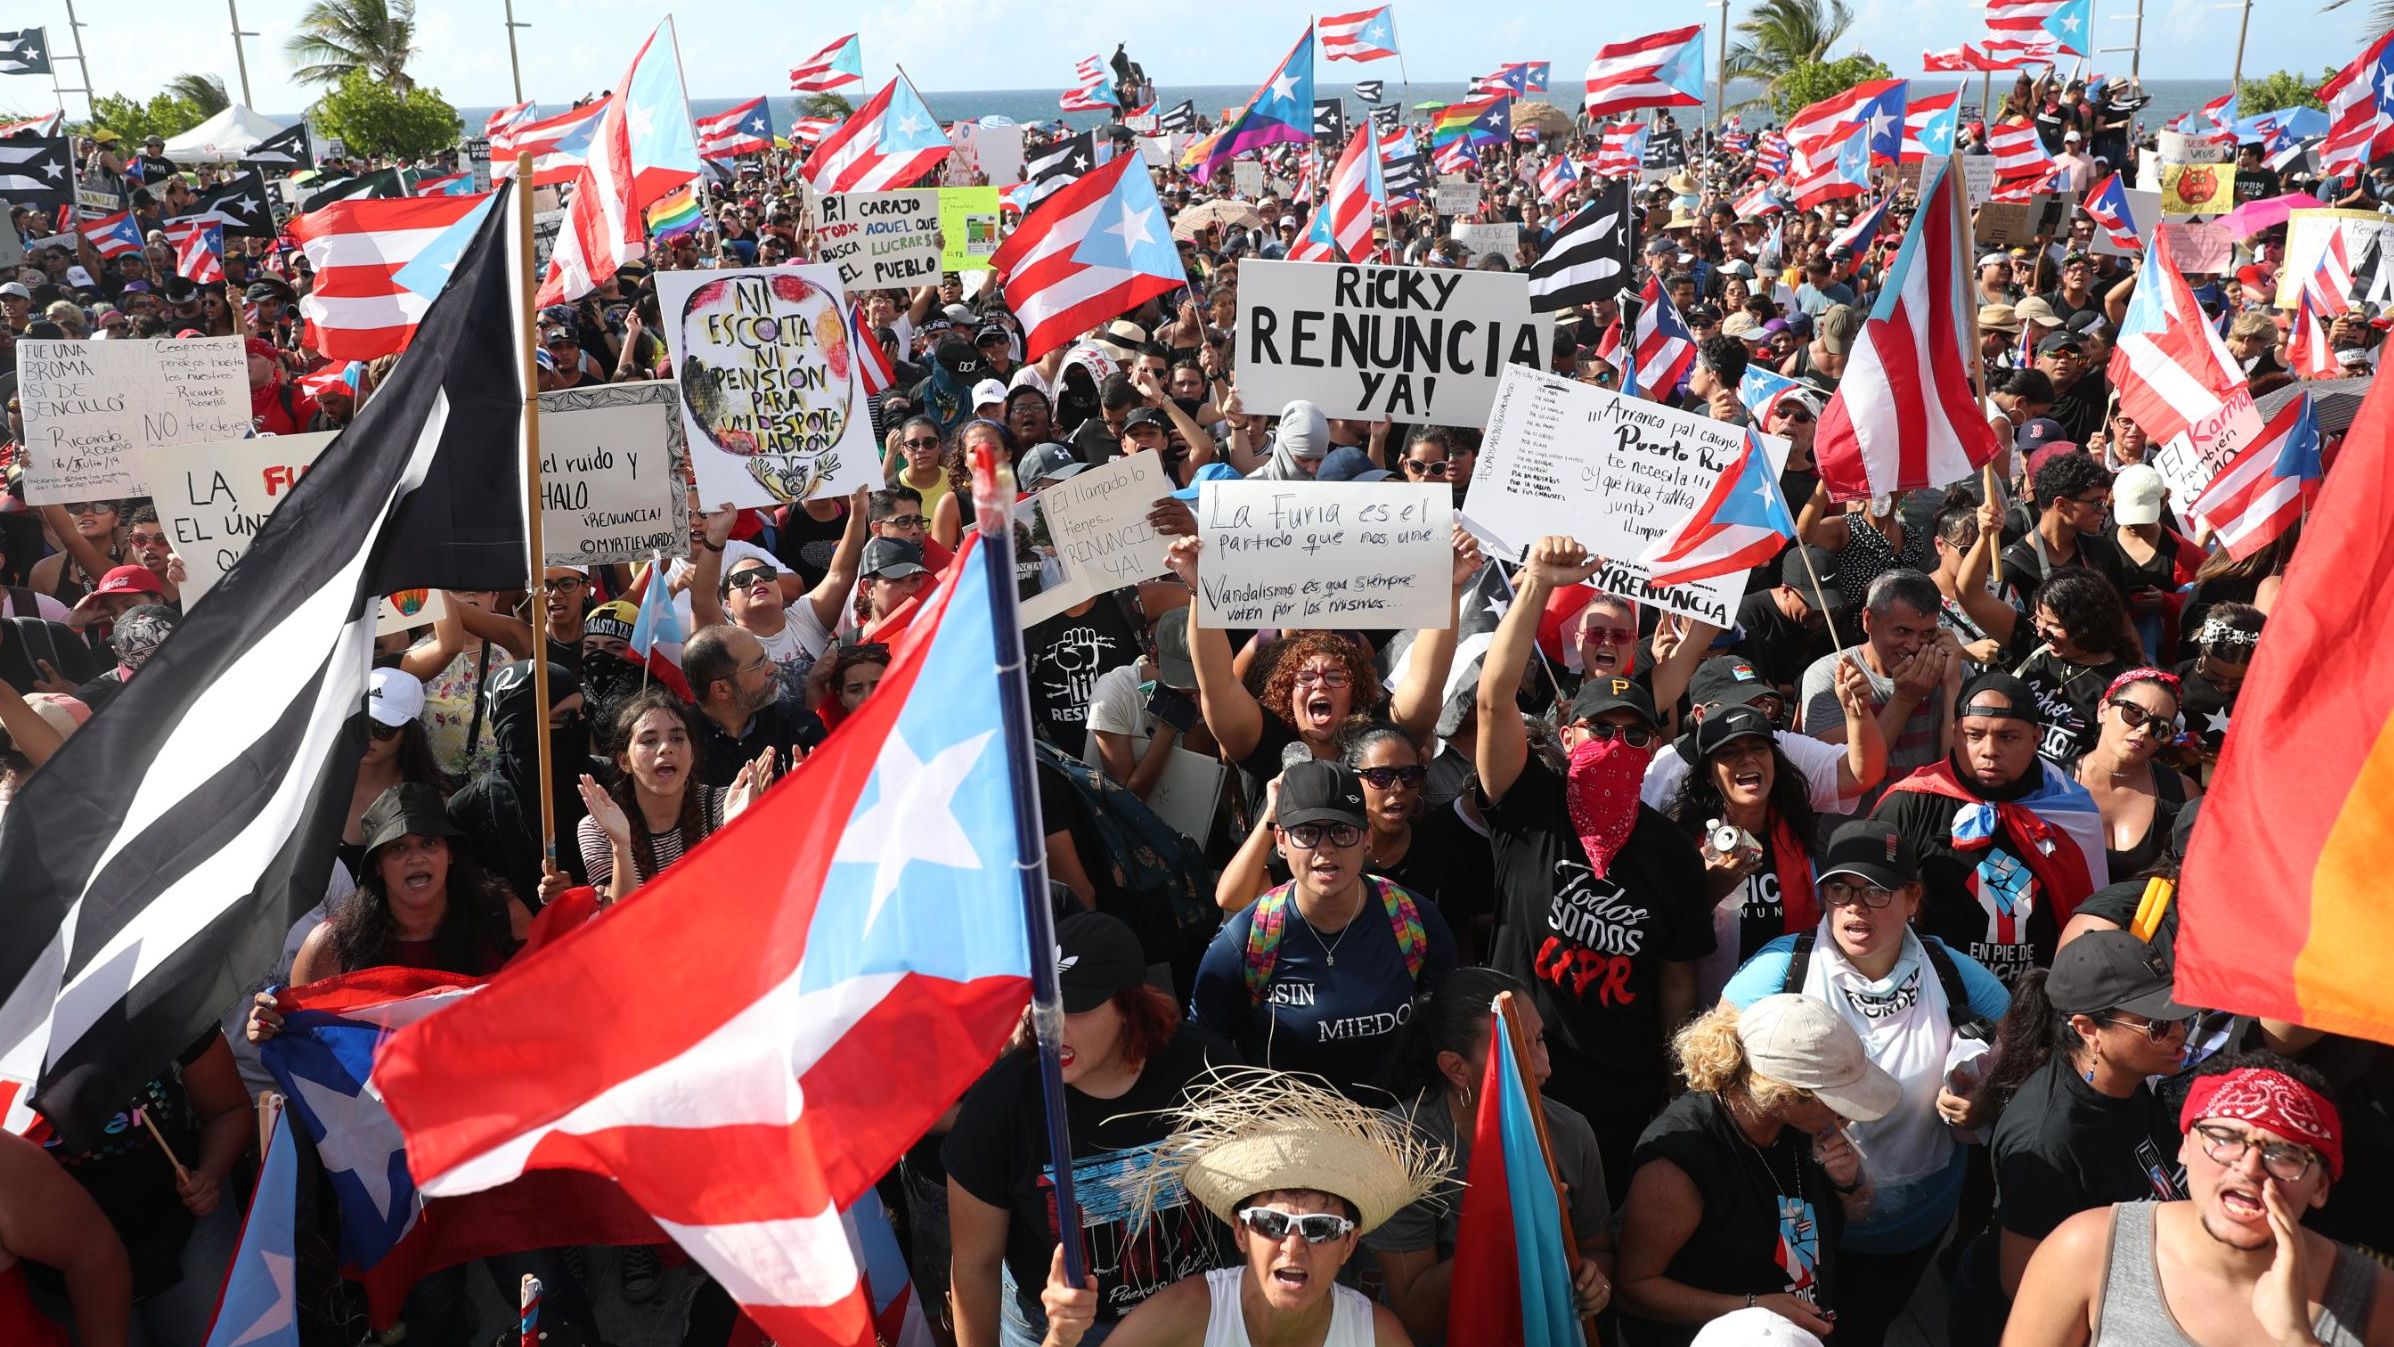 Protesters rallied in front of the capitol building in Old San Juan, Puerto Rico.